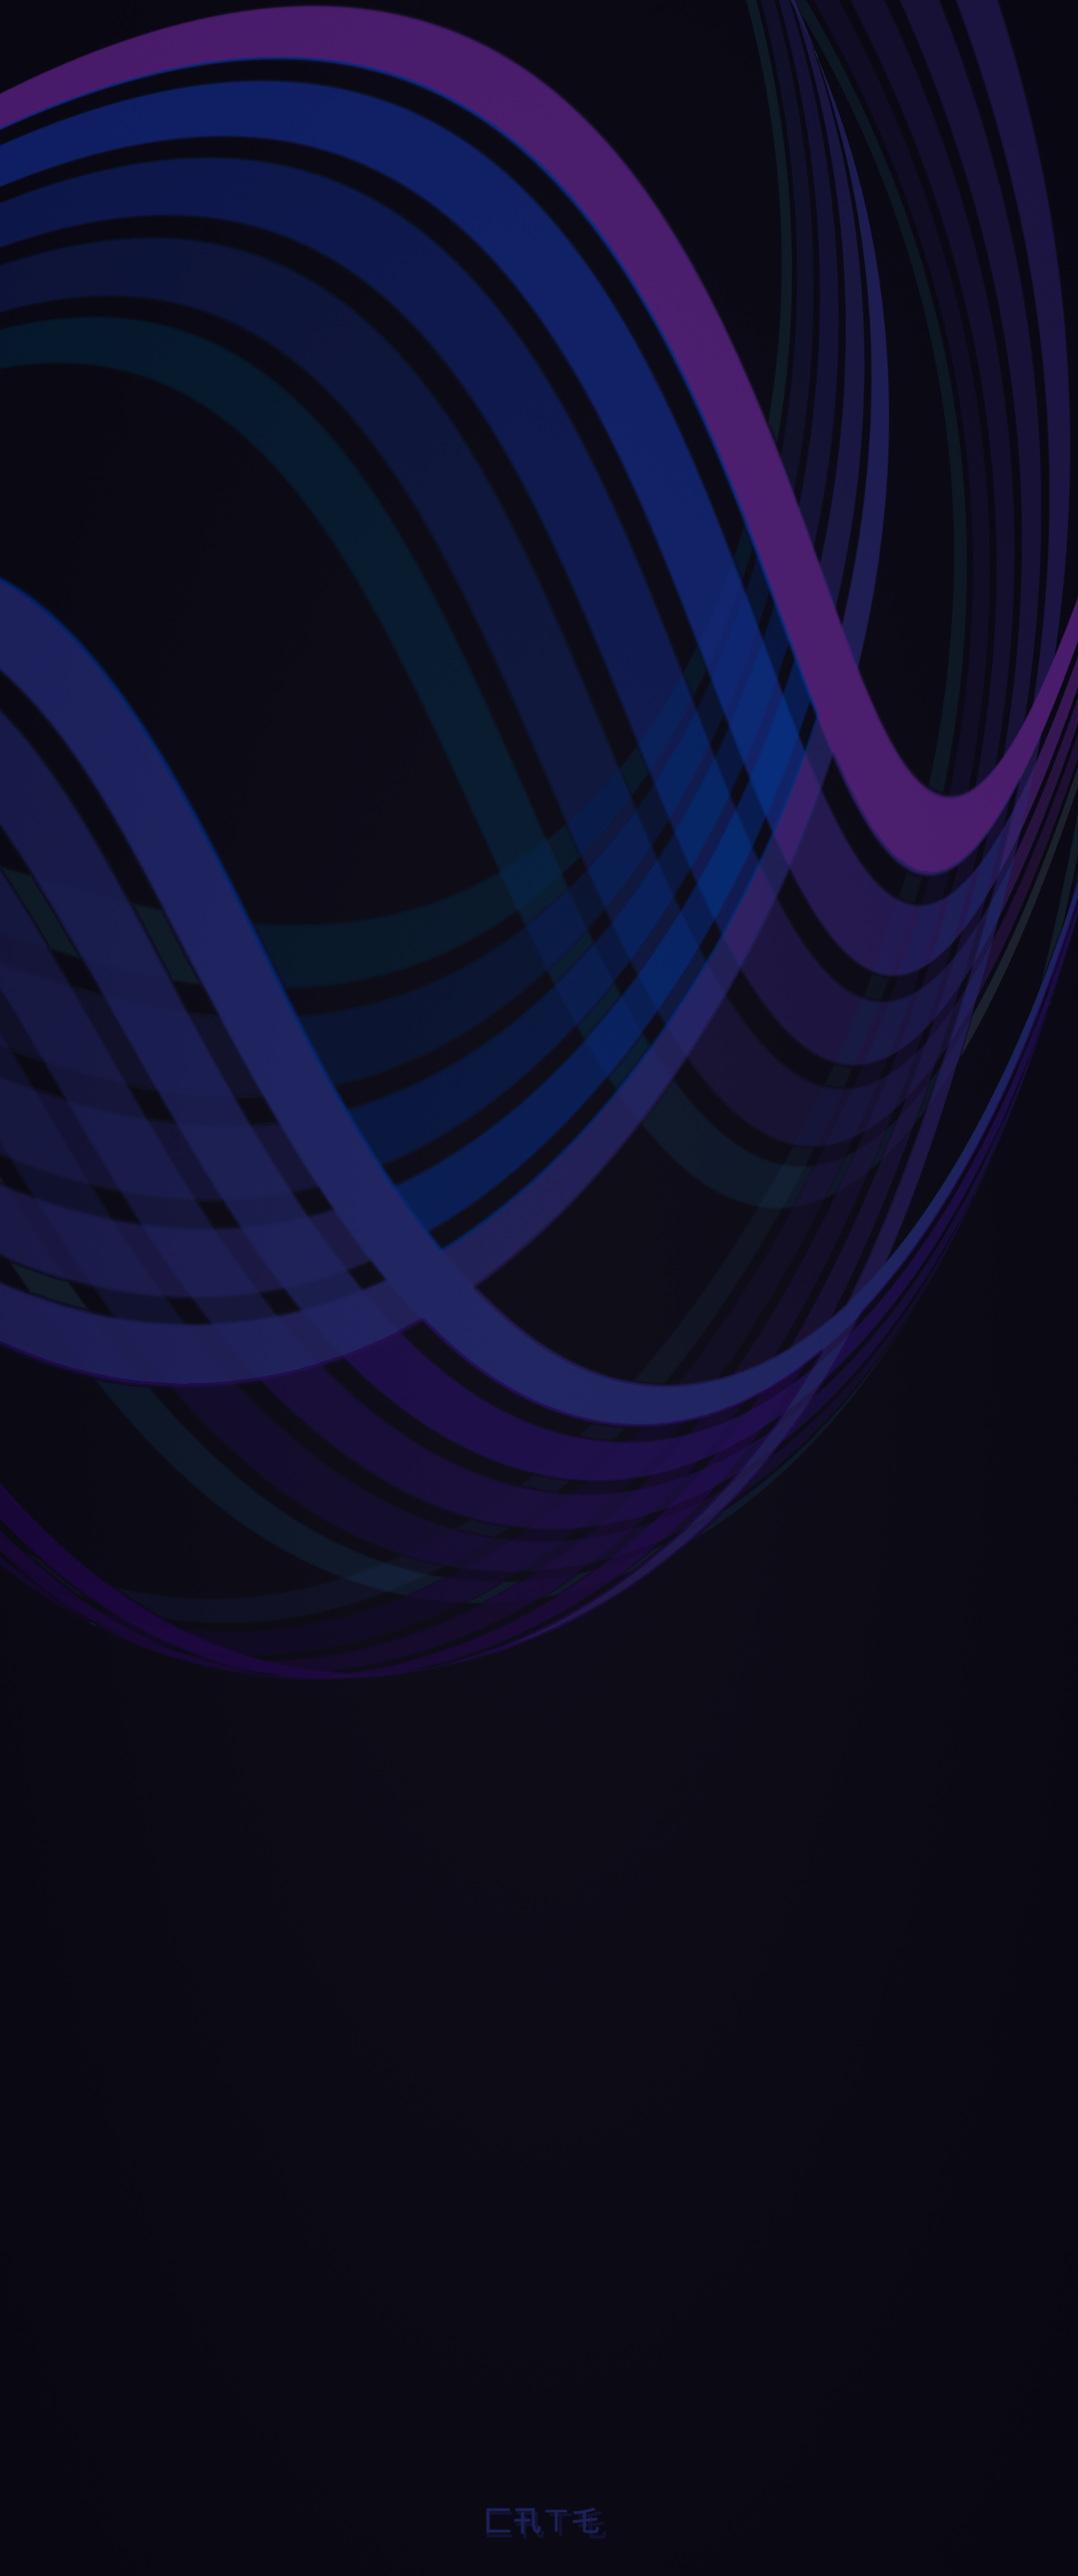 Download these 11 colorful swirls wallpapers for iPhone